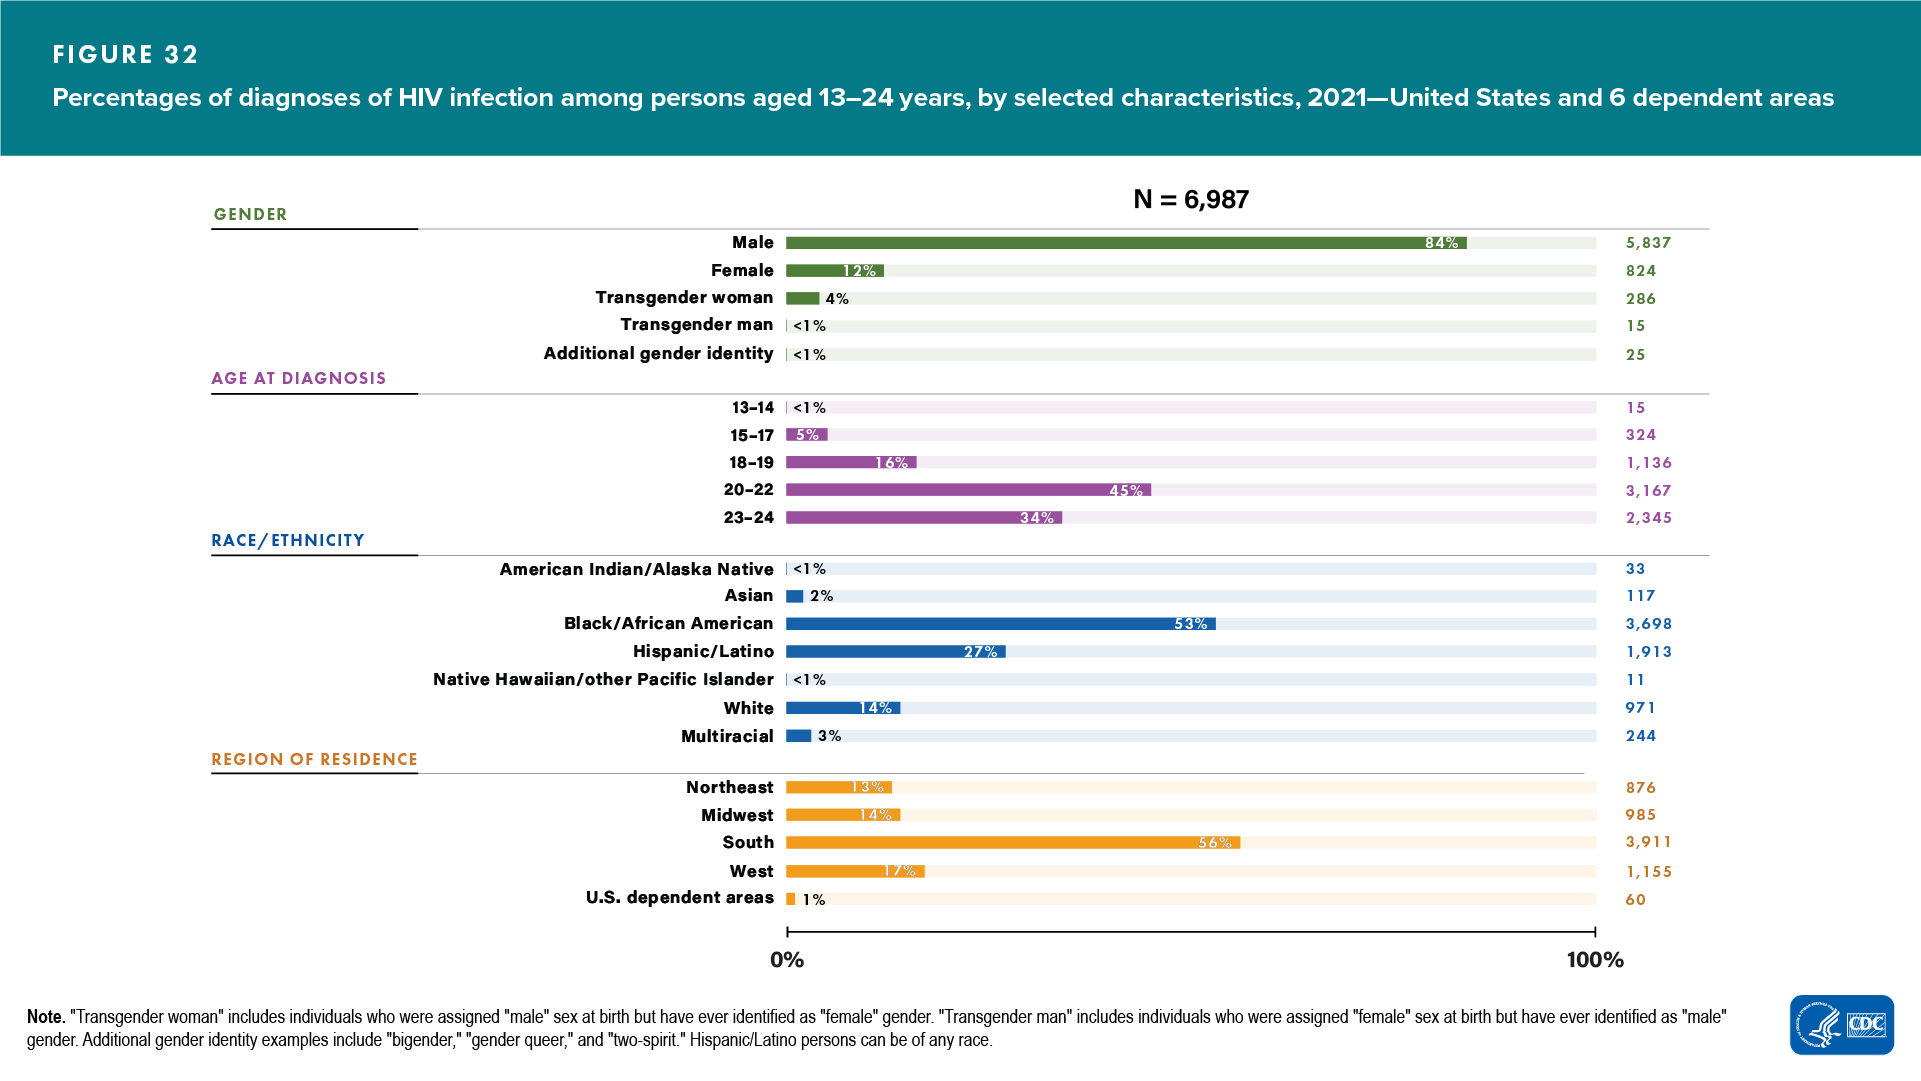 In 2021, among persons aged 13-24 years in the United States and 6 dependent areas, 84% of diagnoses of HIV infection were among male gender, 45% were among persons aged 20-22 years, 53% were among Black/African American persons, and 56% were among persons residing in the South.